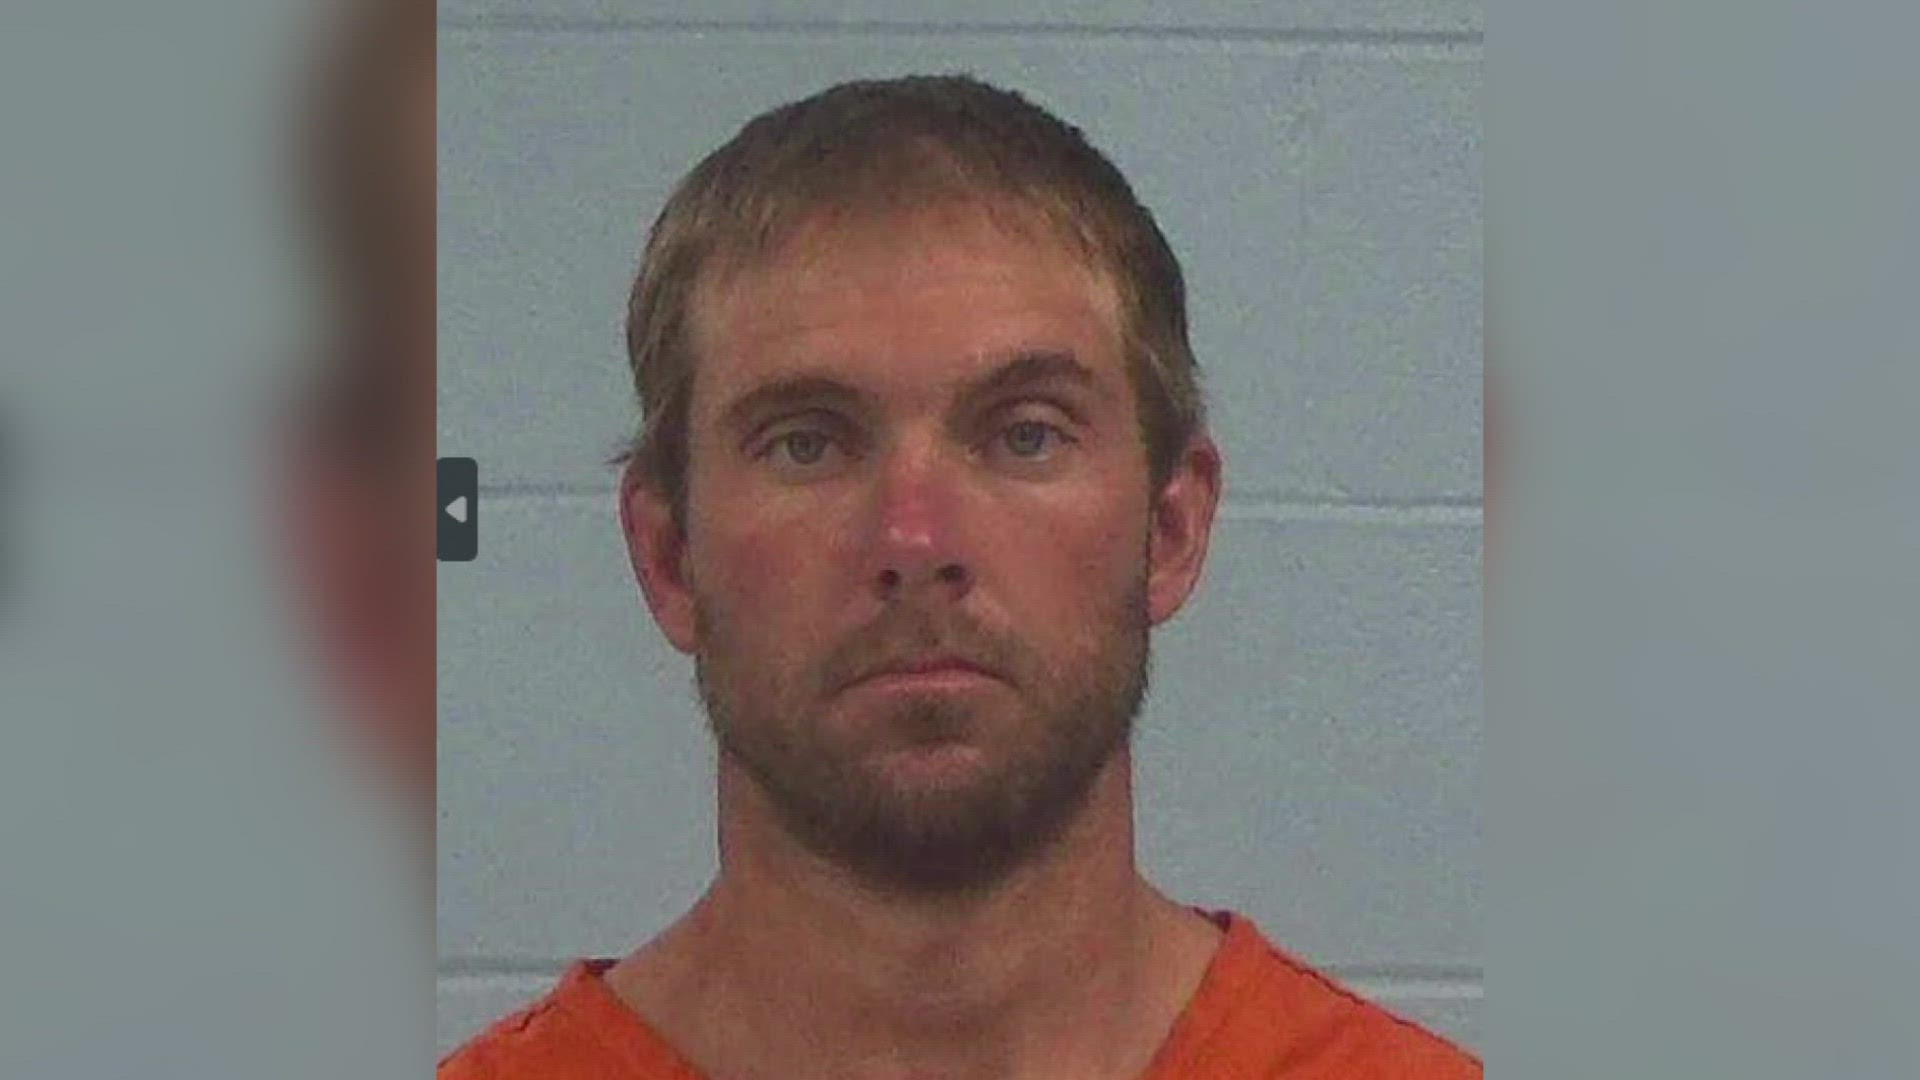 Madden was transported to the Bell County jail, where he currently awaits arraignment.